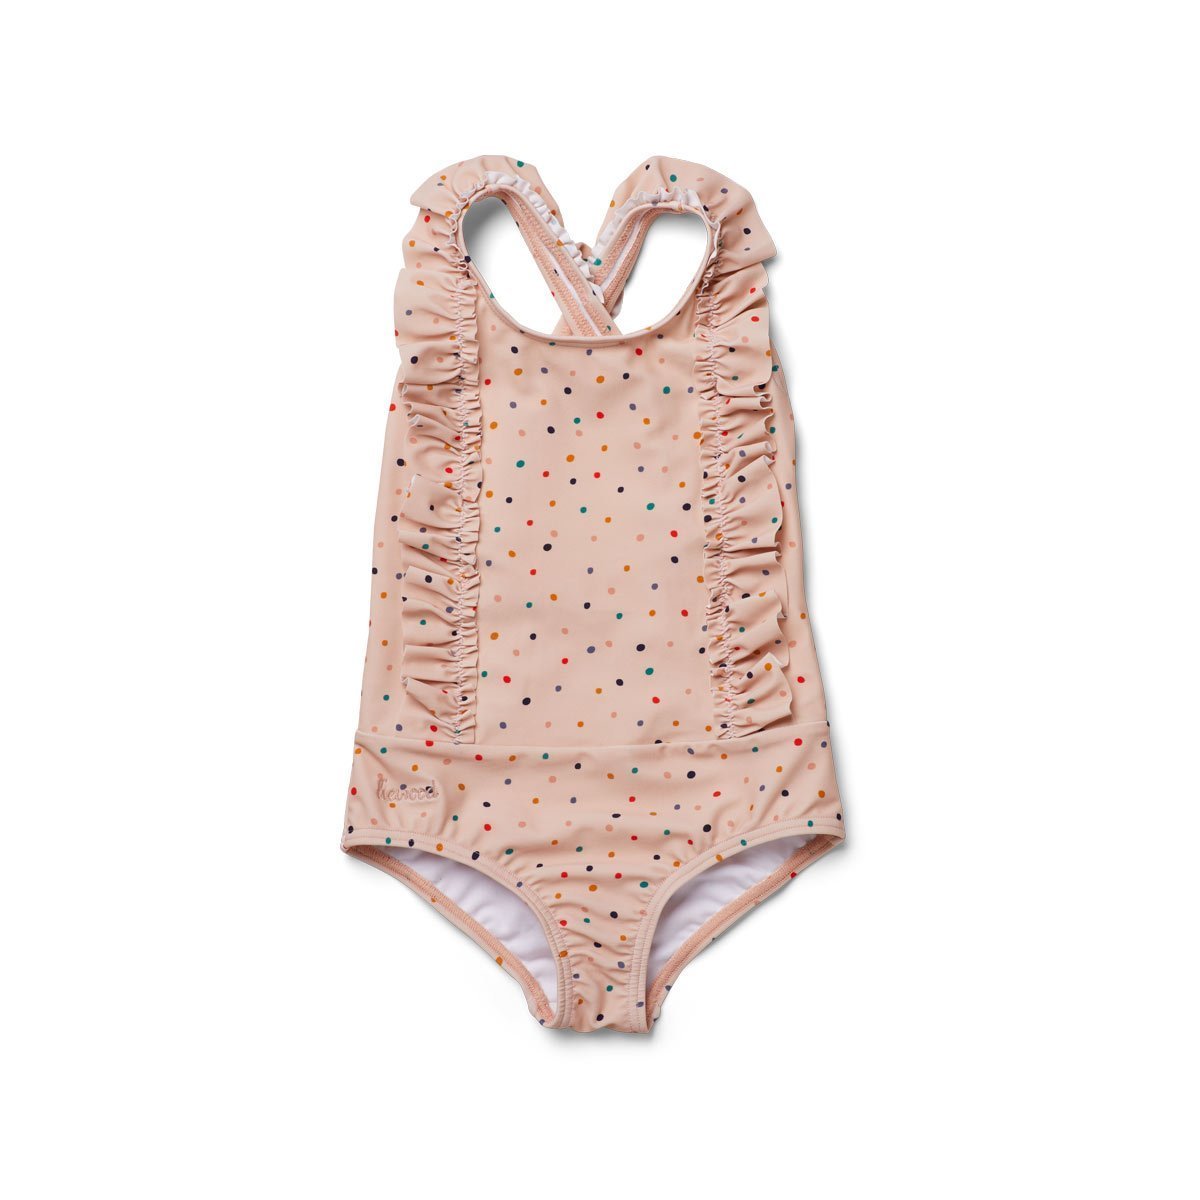 Liewood Moa Swimsuit in Confetti mix - Scandibørn